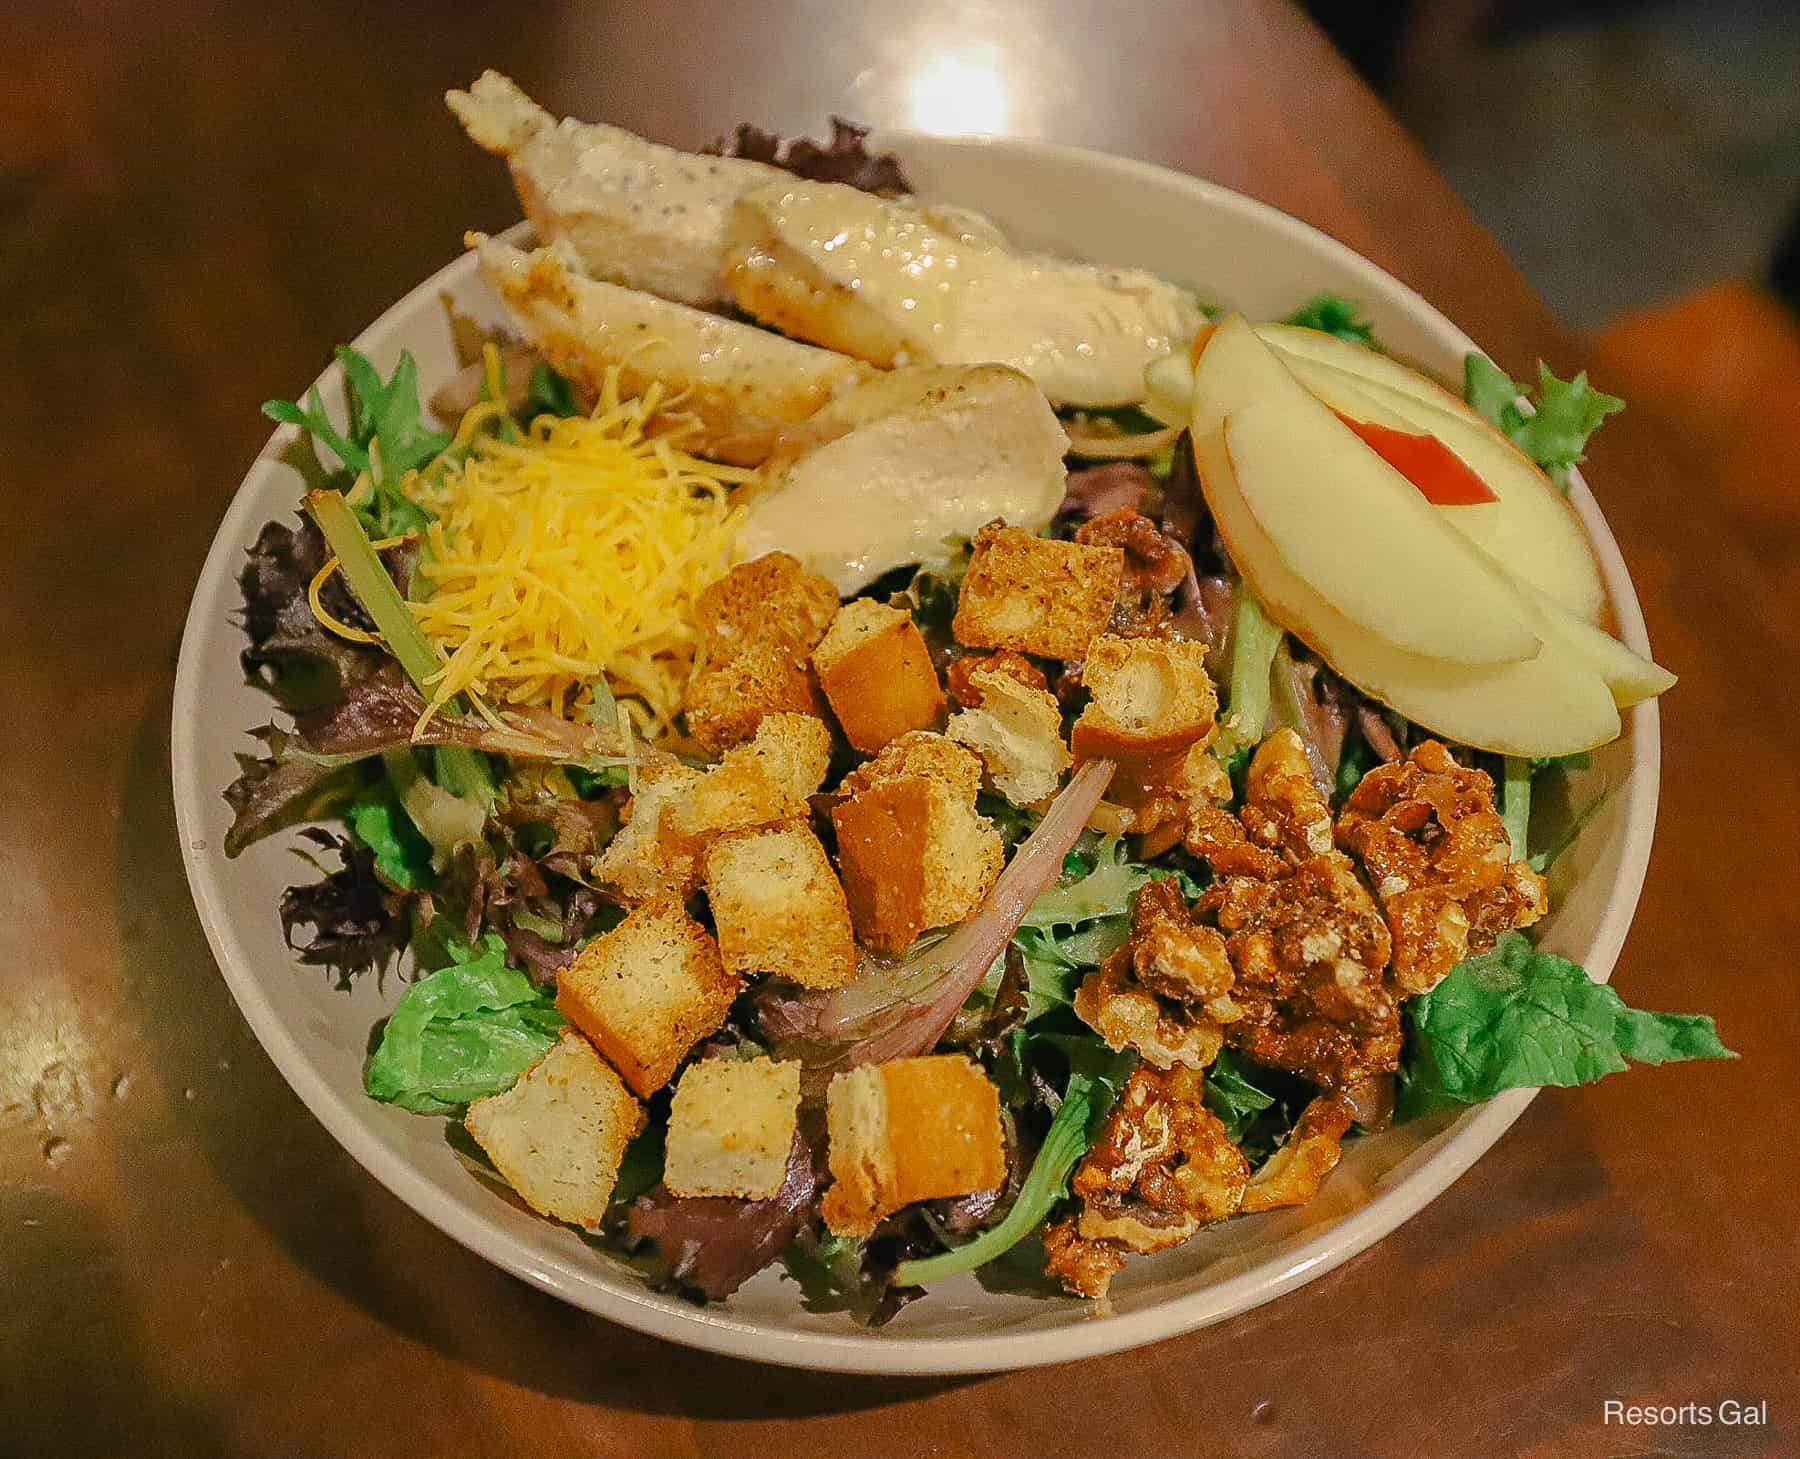 the Wilderness Lodge salad topped with candied pecans and apple slices 